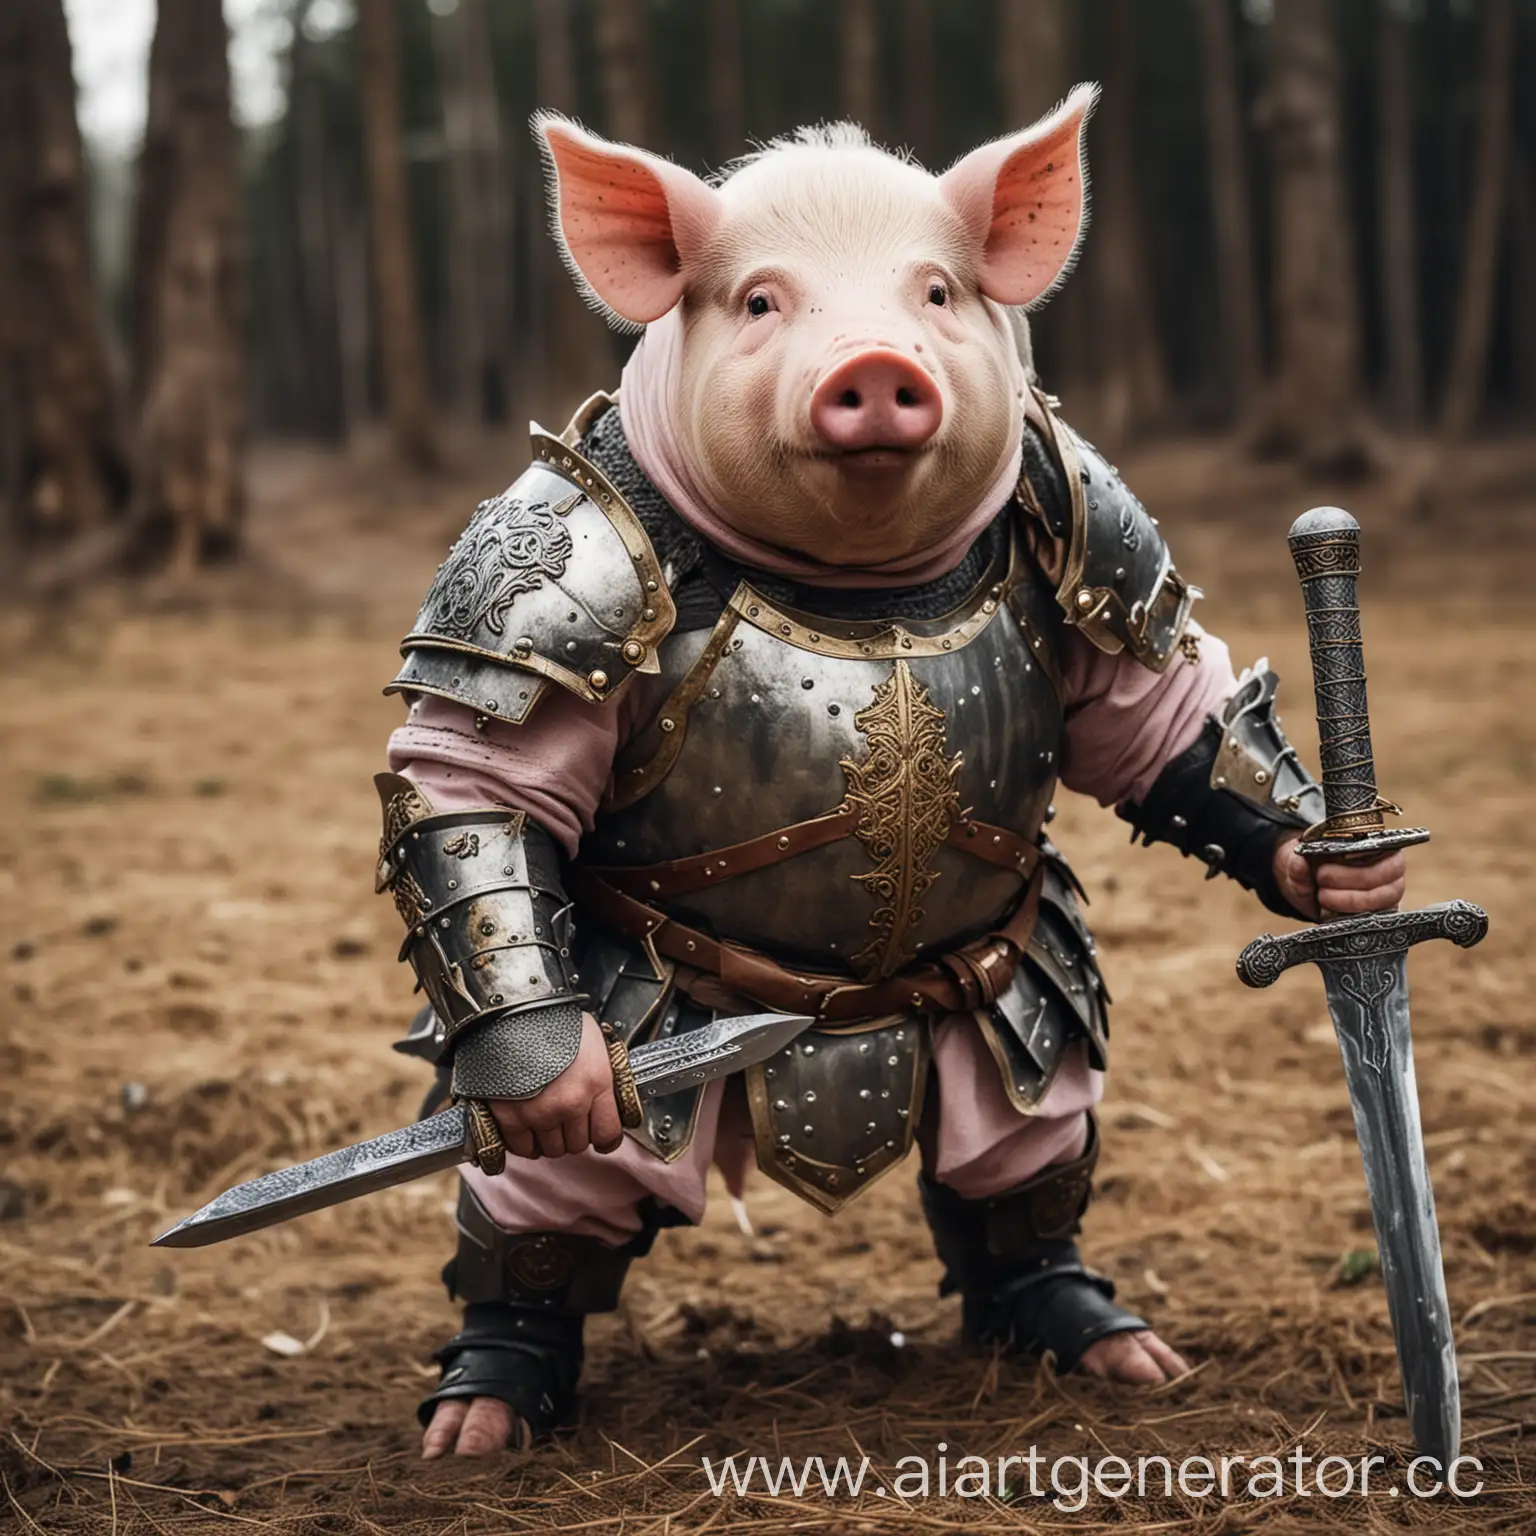 Swine-in-Armor-with-Sword-Ready-for-Battle